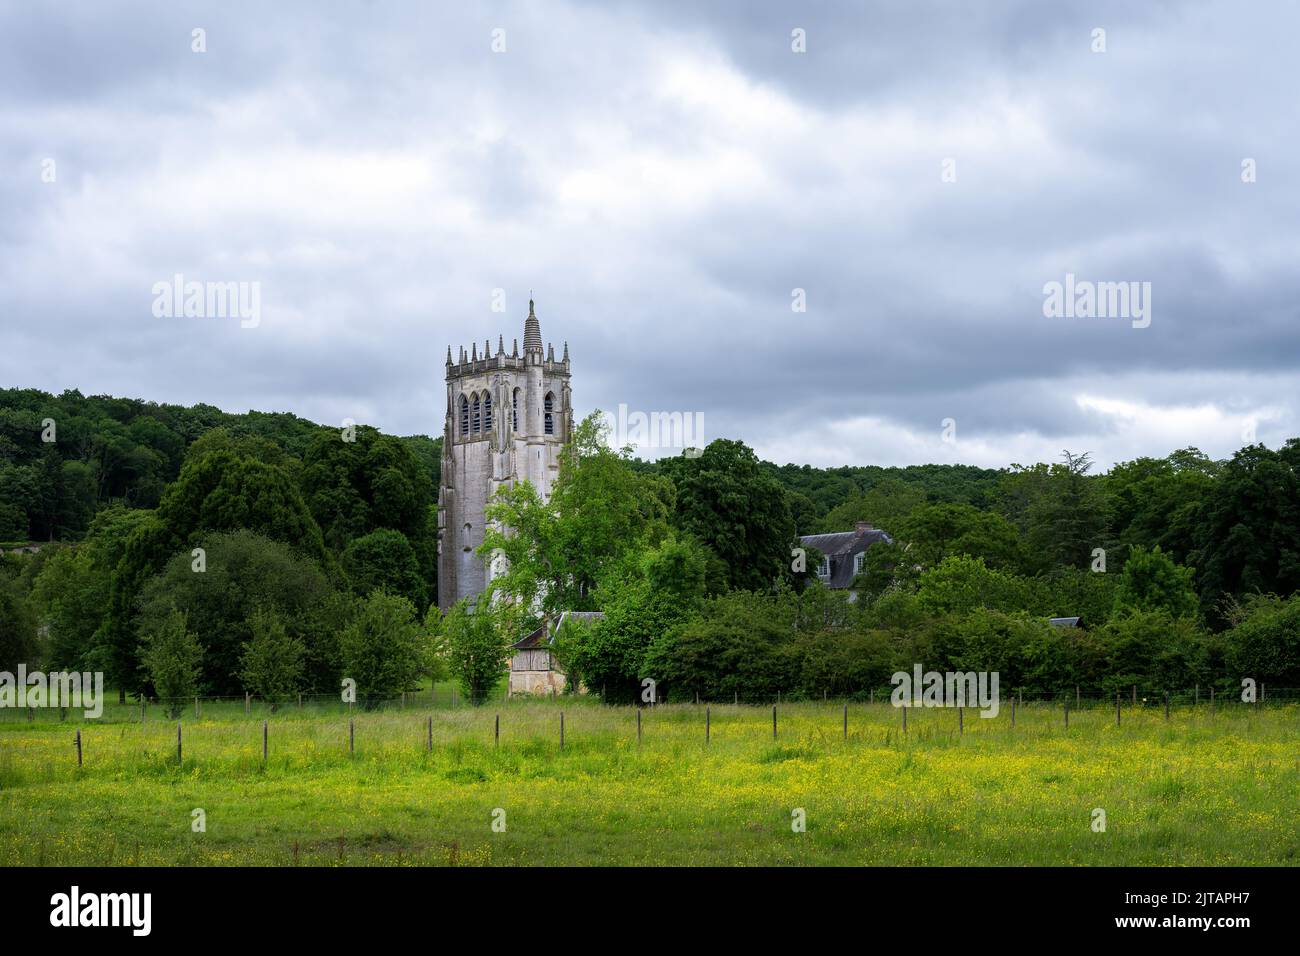 St Nicolas tower in the Notre-Dame du Bec Benedectine abbey on a cloudy spring afternoon, Le bec-Hellouin, Normandy, France Stock Photo